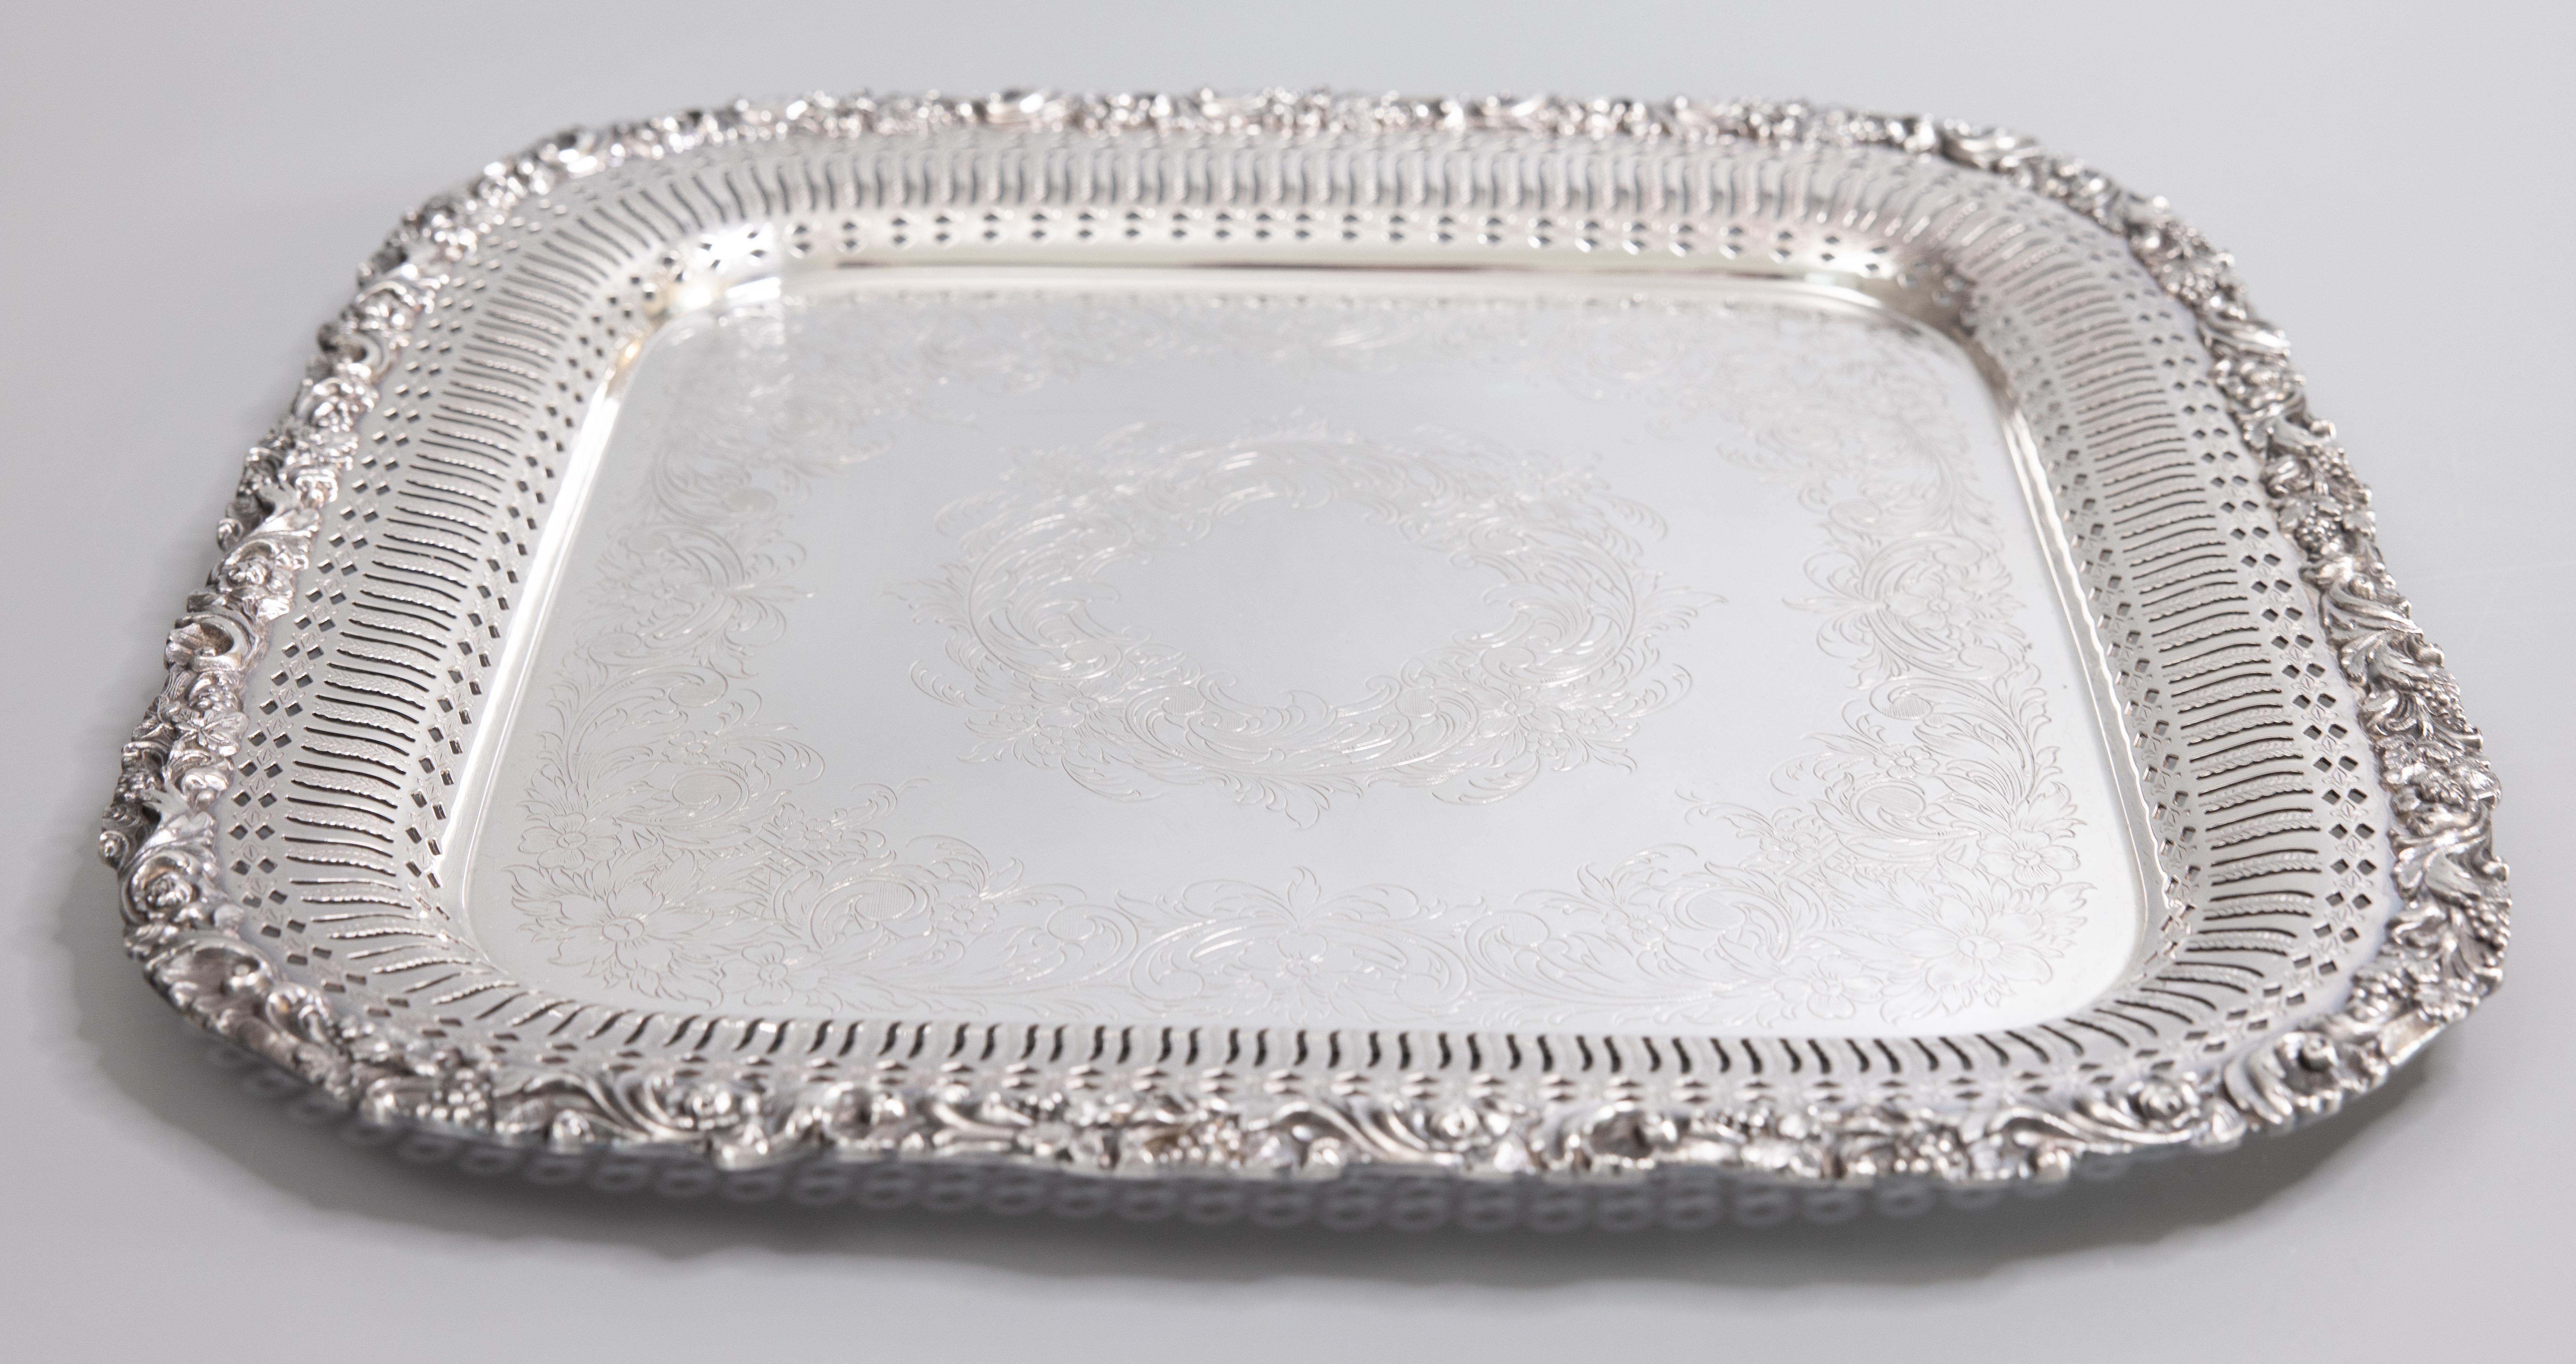 A lovely midcentury silverplate serving tray by International Silver Co. Maker's mark on reverse. This fine quality silver tray is well made and heavy with gorgeous chasing and an ornate scrolling grape vine border. It would be fabulous displayed as